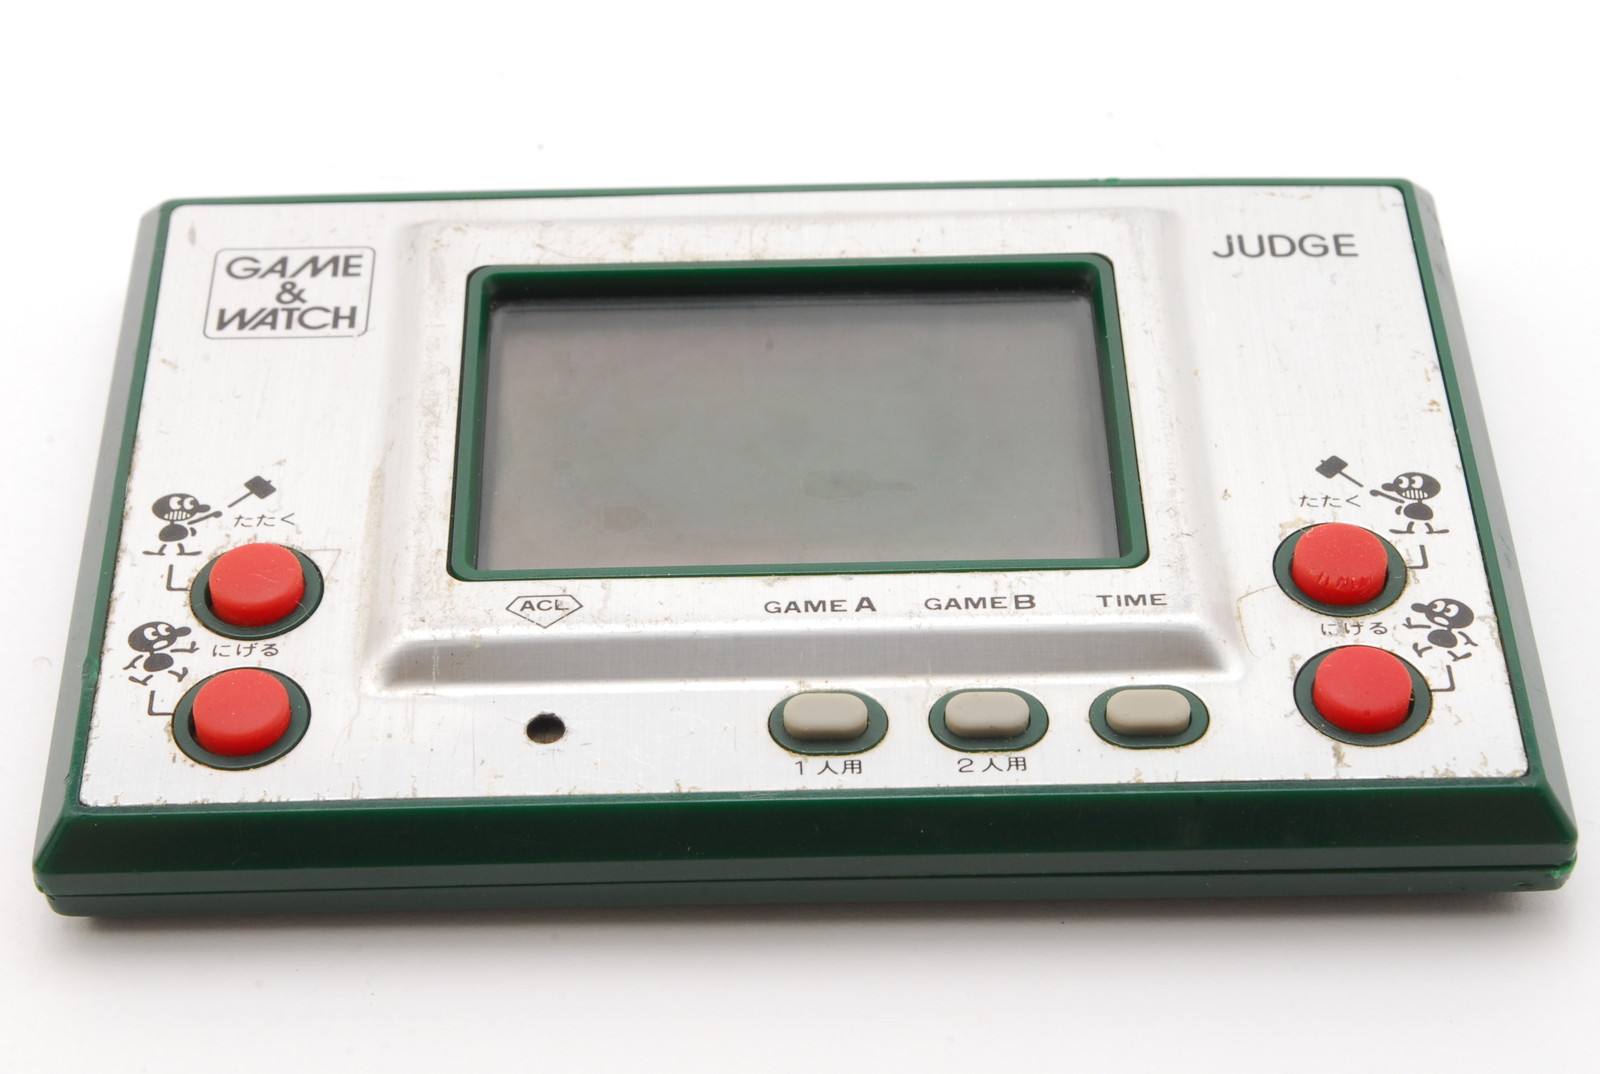 PROMOTION. EXC+++ Nintendo Game and Watch Judge IP-05 Green Color Made in 1980 from Japan